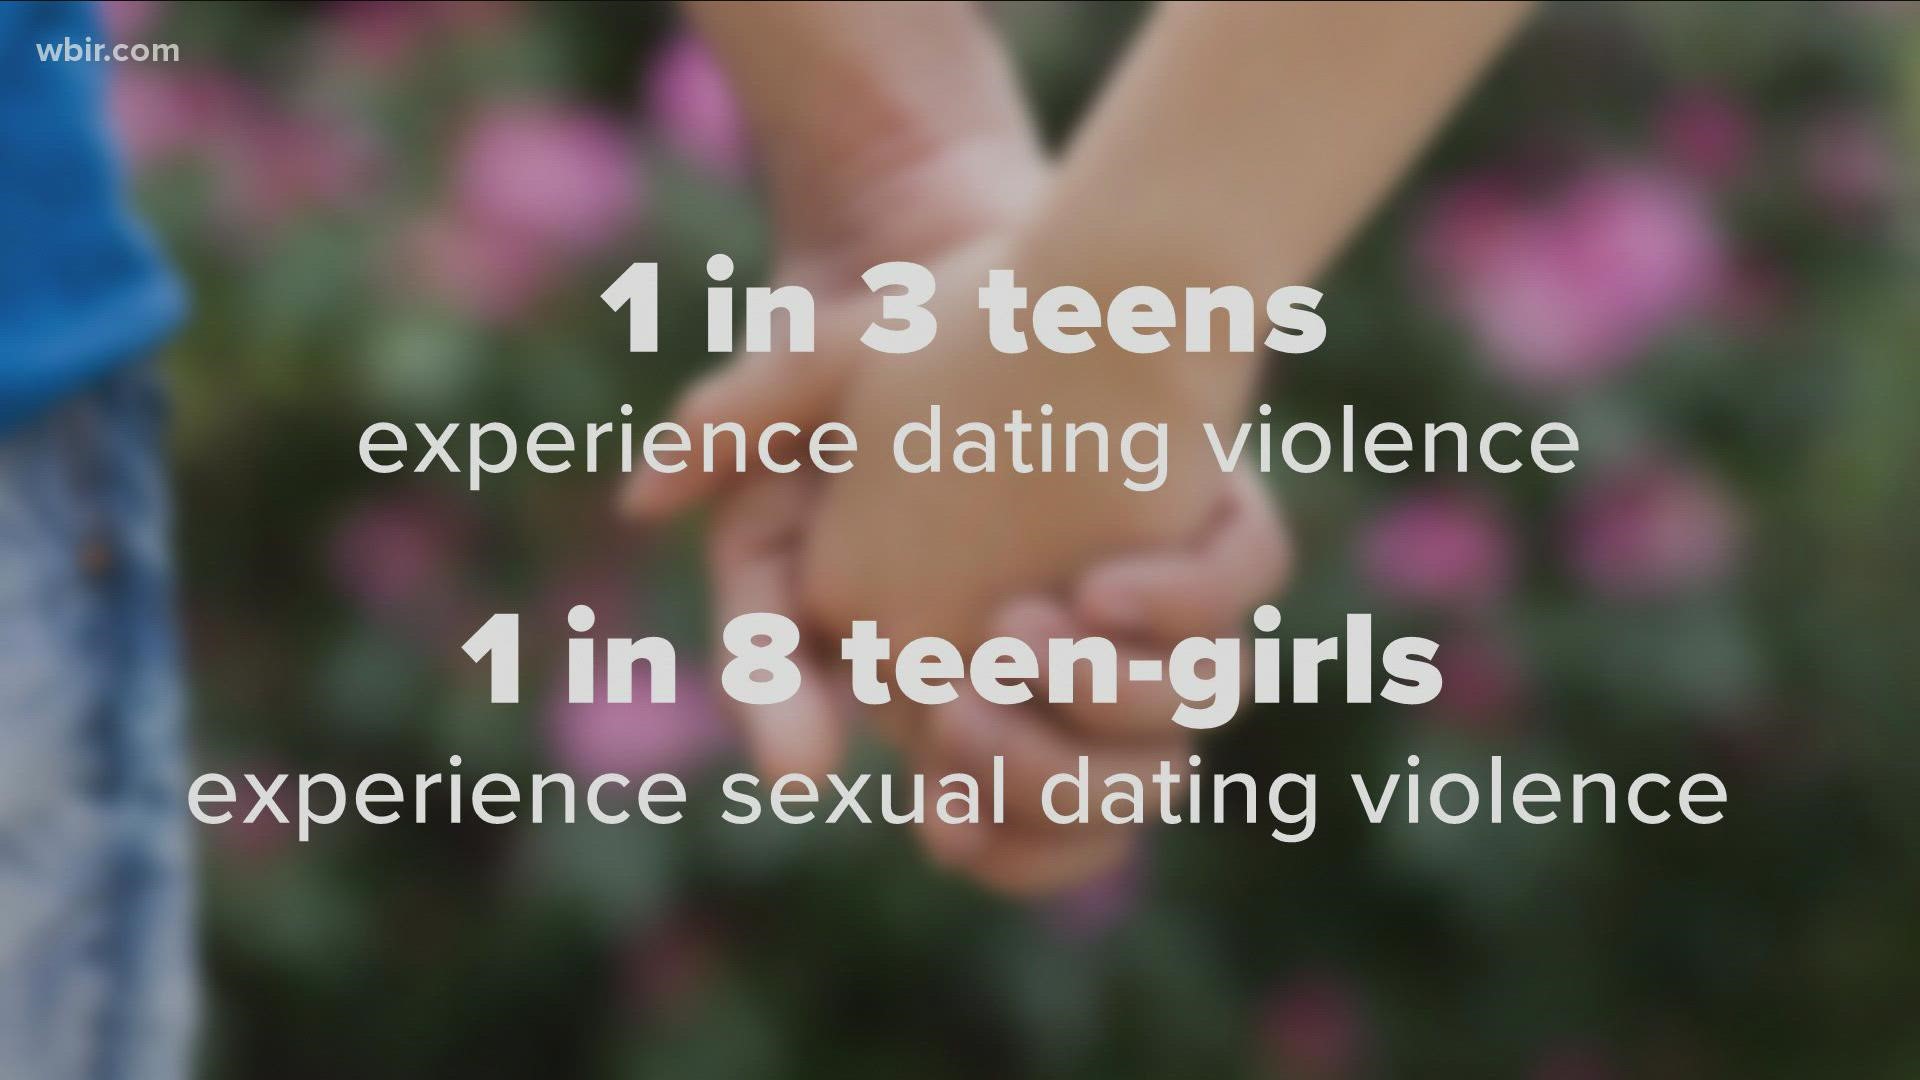 Dating violence affects one in every three teenagers, making them more susceptible to domestic violence situations in the future.